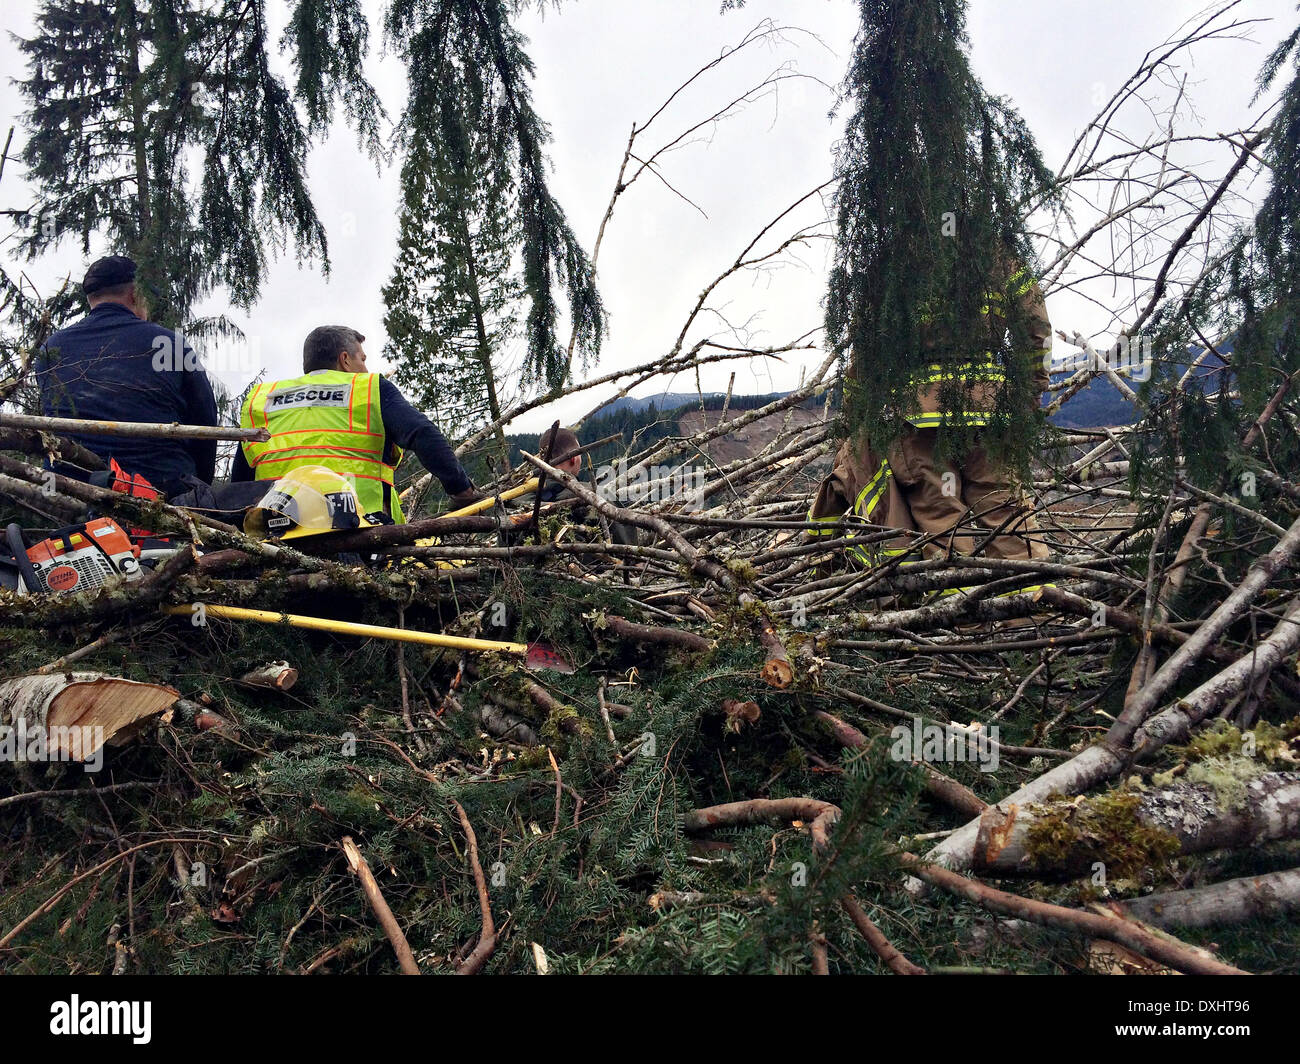 Rescue workers take a break during efforts to locate victims of a massive landslide that blocked the Stillaguamish River burying State Route 530 and causing a massive mudslide killing at least fourteen people and destroying a small riverside village in northwestern Washington state March 22, 2014 in Oso, Washington. Officials report that 176 people are still missing and feared dead. Stock Photo